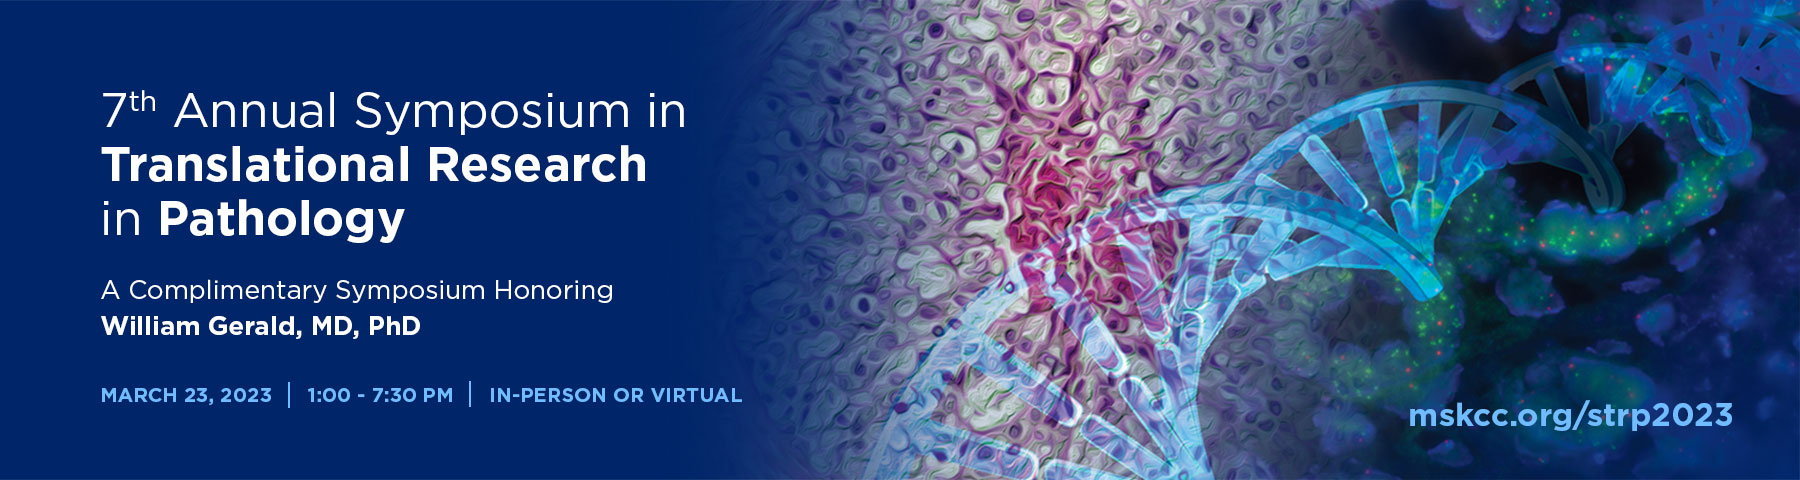 7th Annual Symposium in Translational Research in Pathology Banner